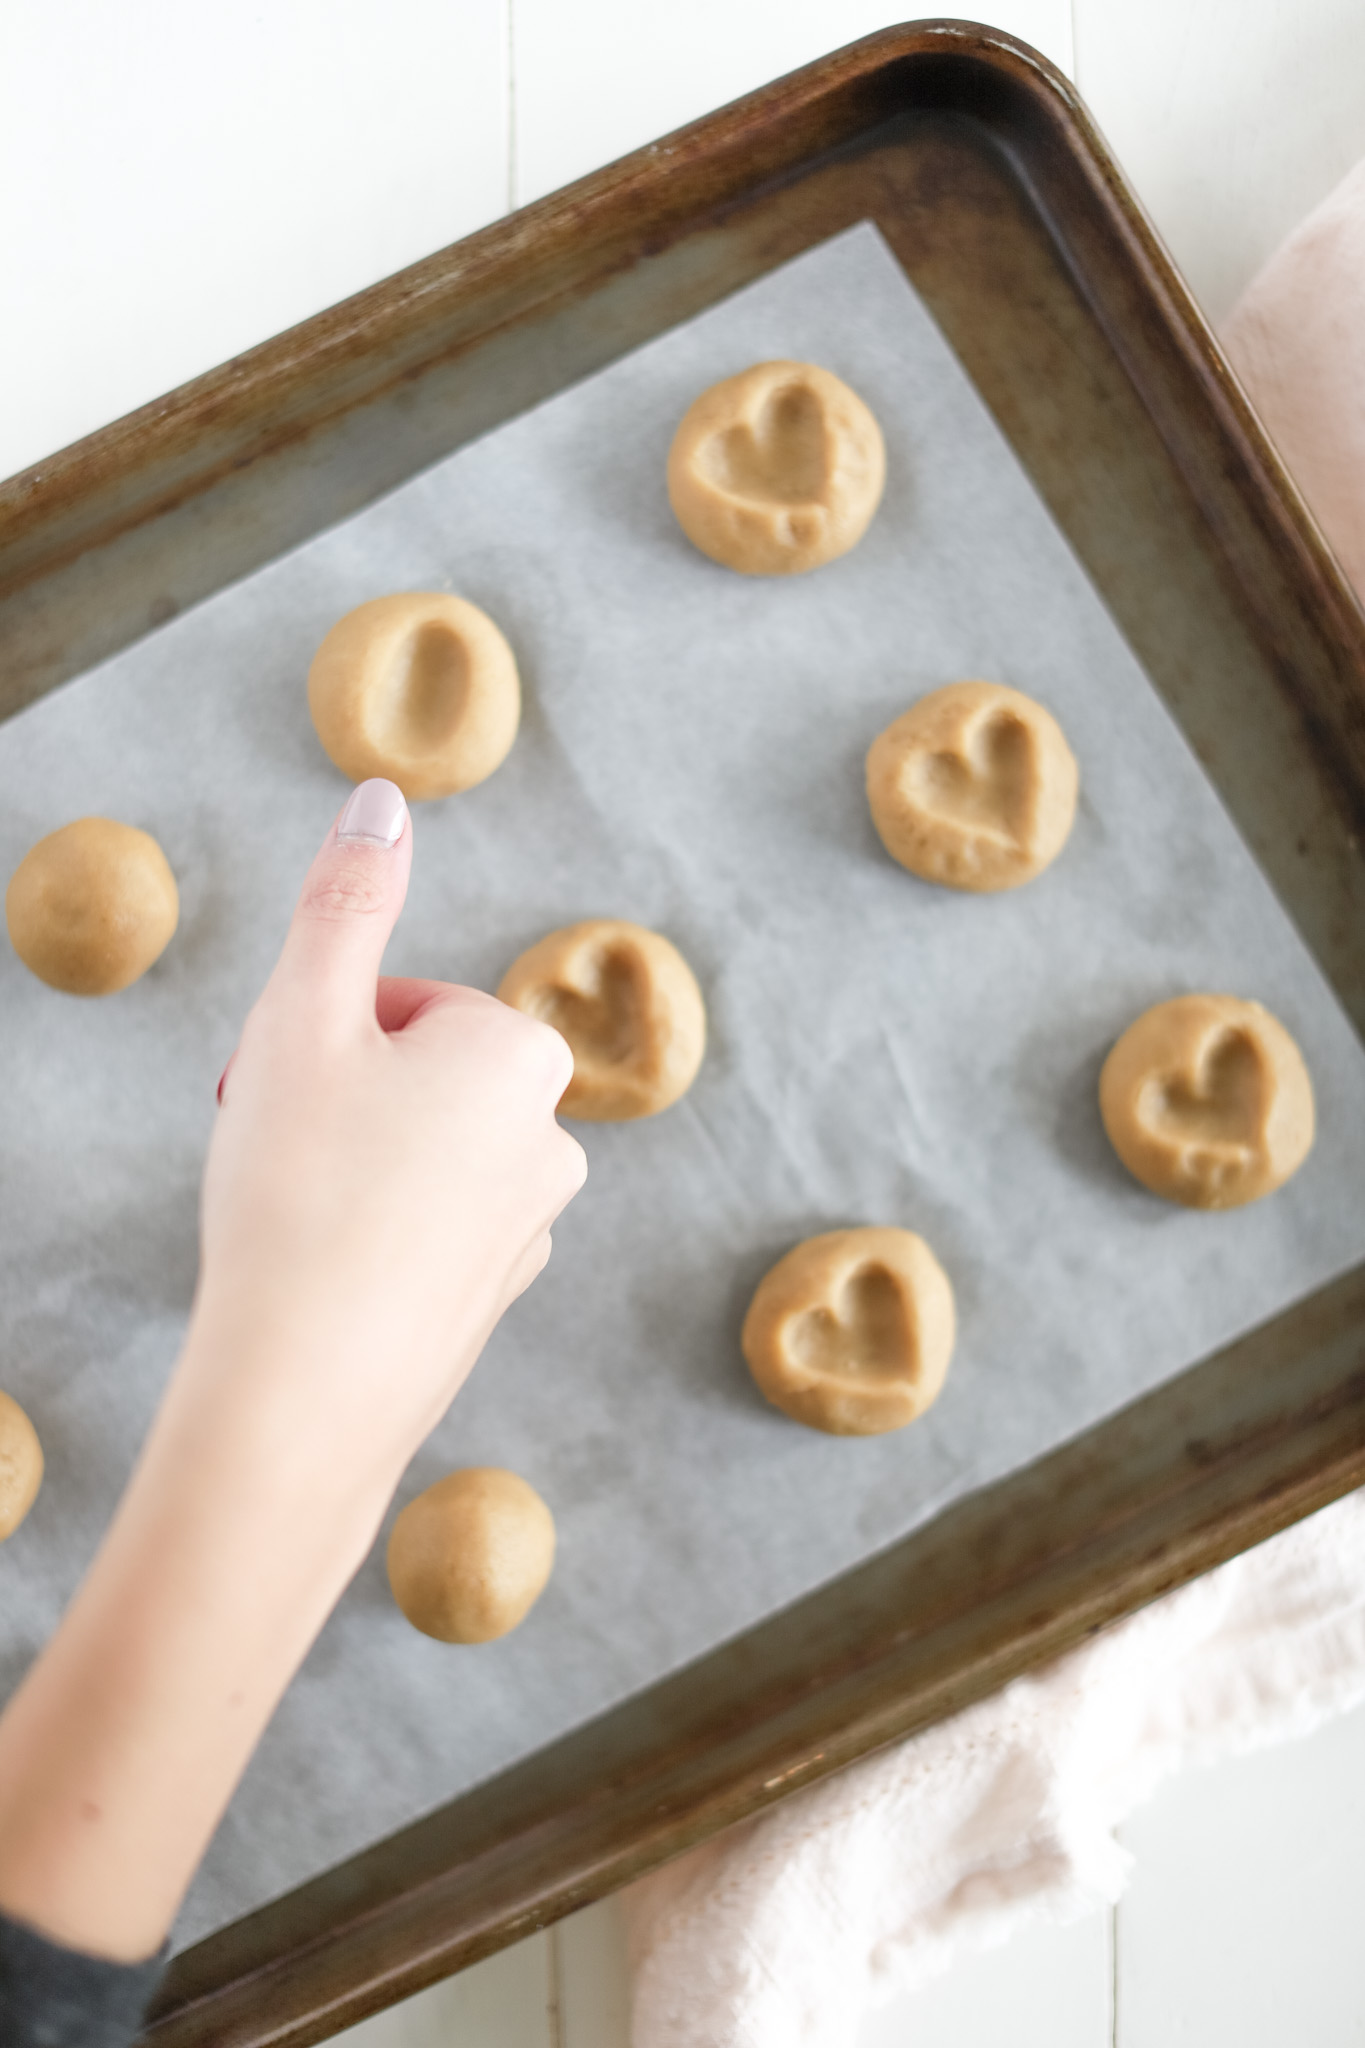 make a thumbprint cookie with your thumb